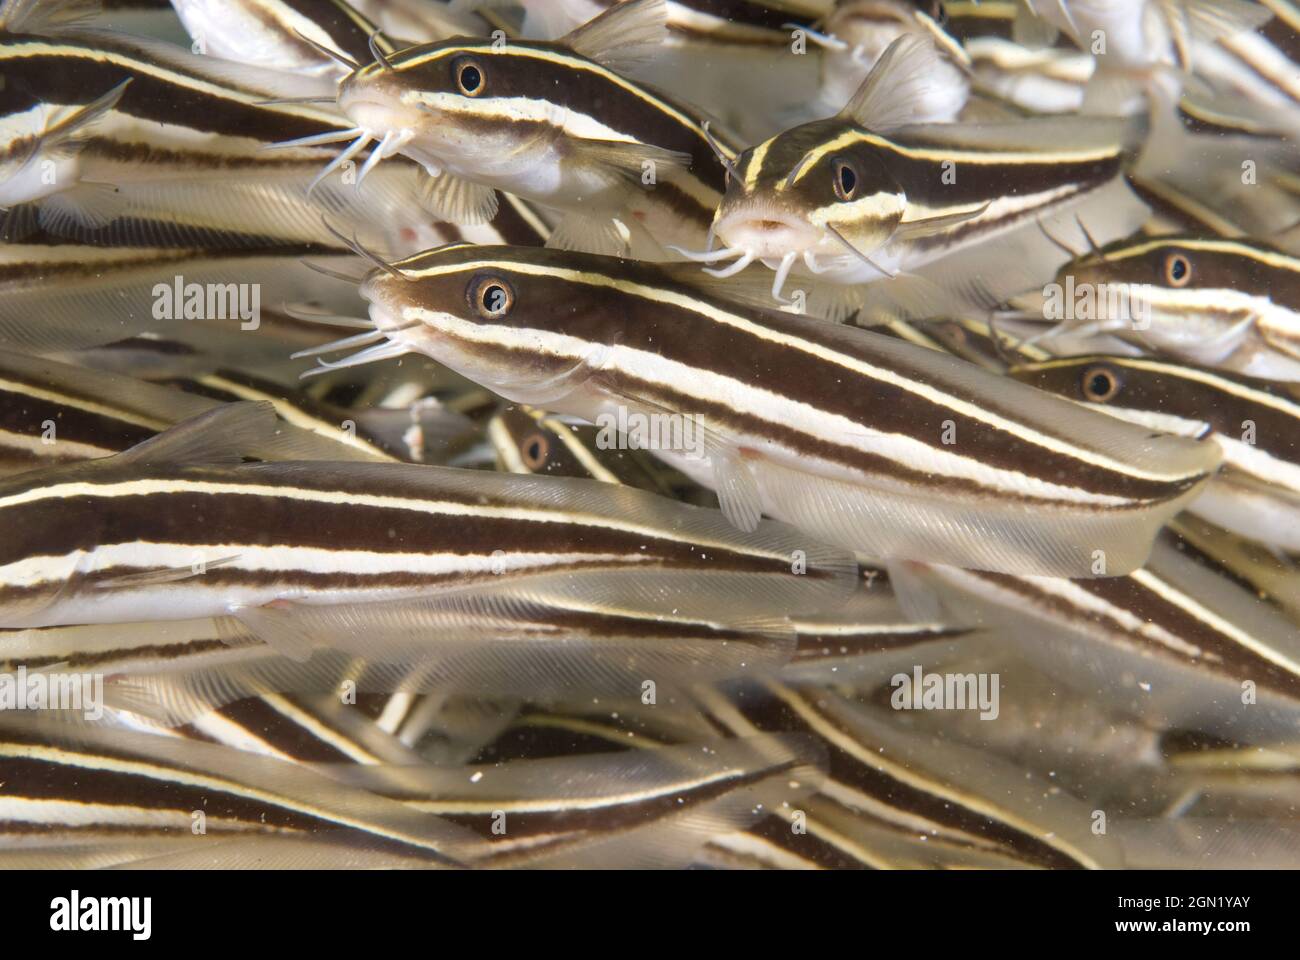 Striped eel catfish (Plotosus lineatus), Looking almost like eels, these fish swim in tightly packed groups that swarm across coral reefs. The whole f Stock Photo